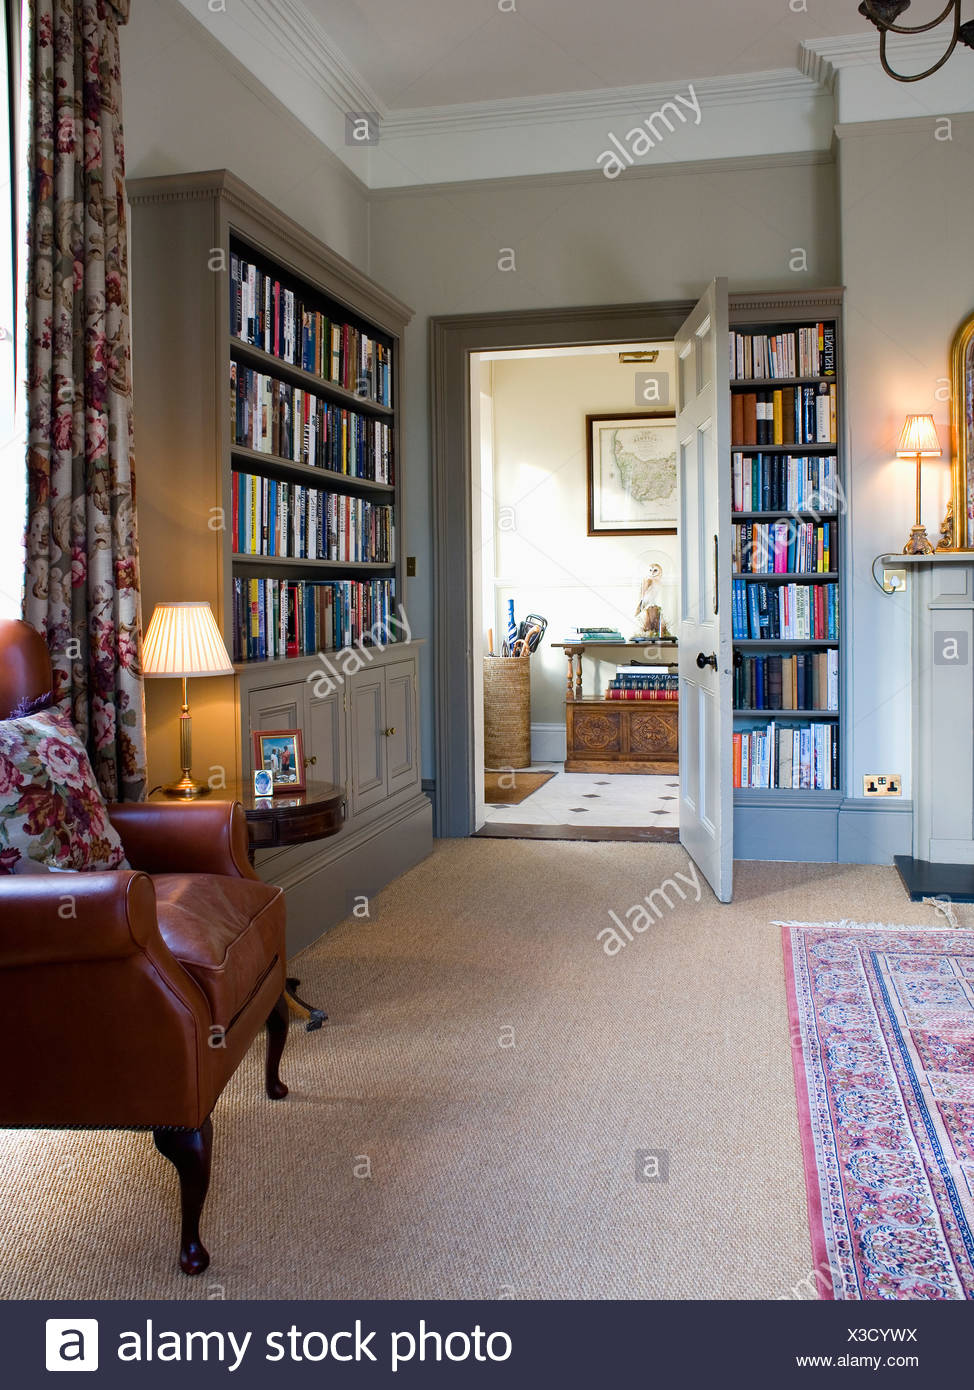 Beige Carpet In Living Room With Fitted Bookshelves On Either Side